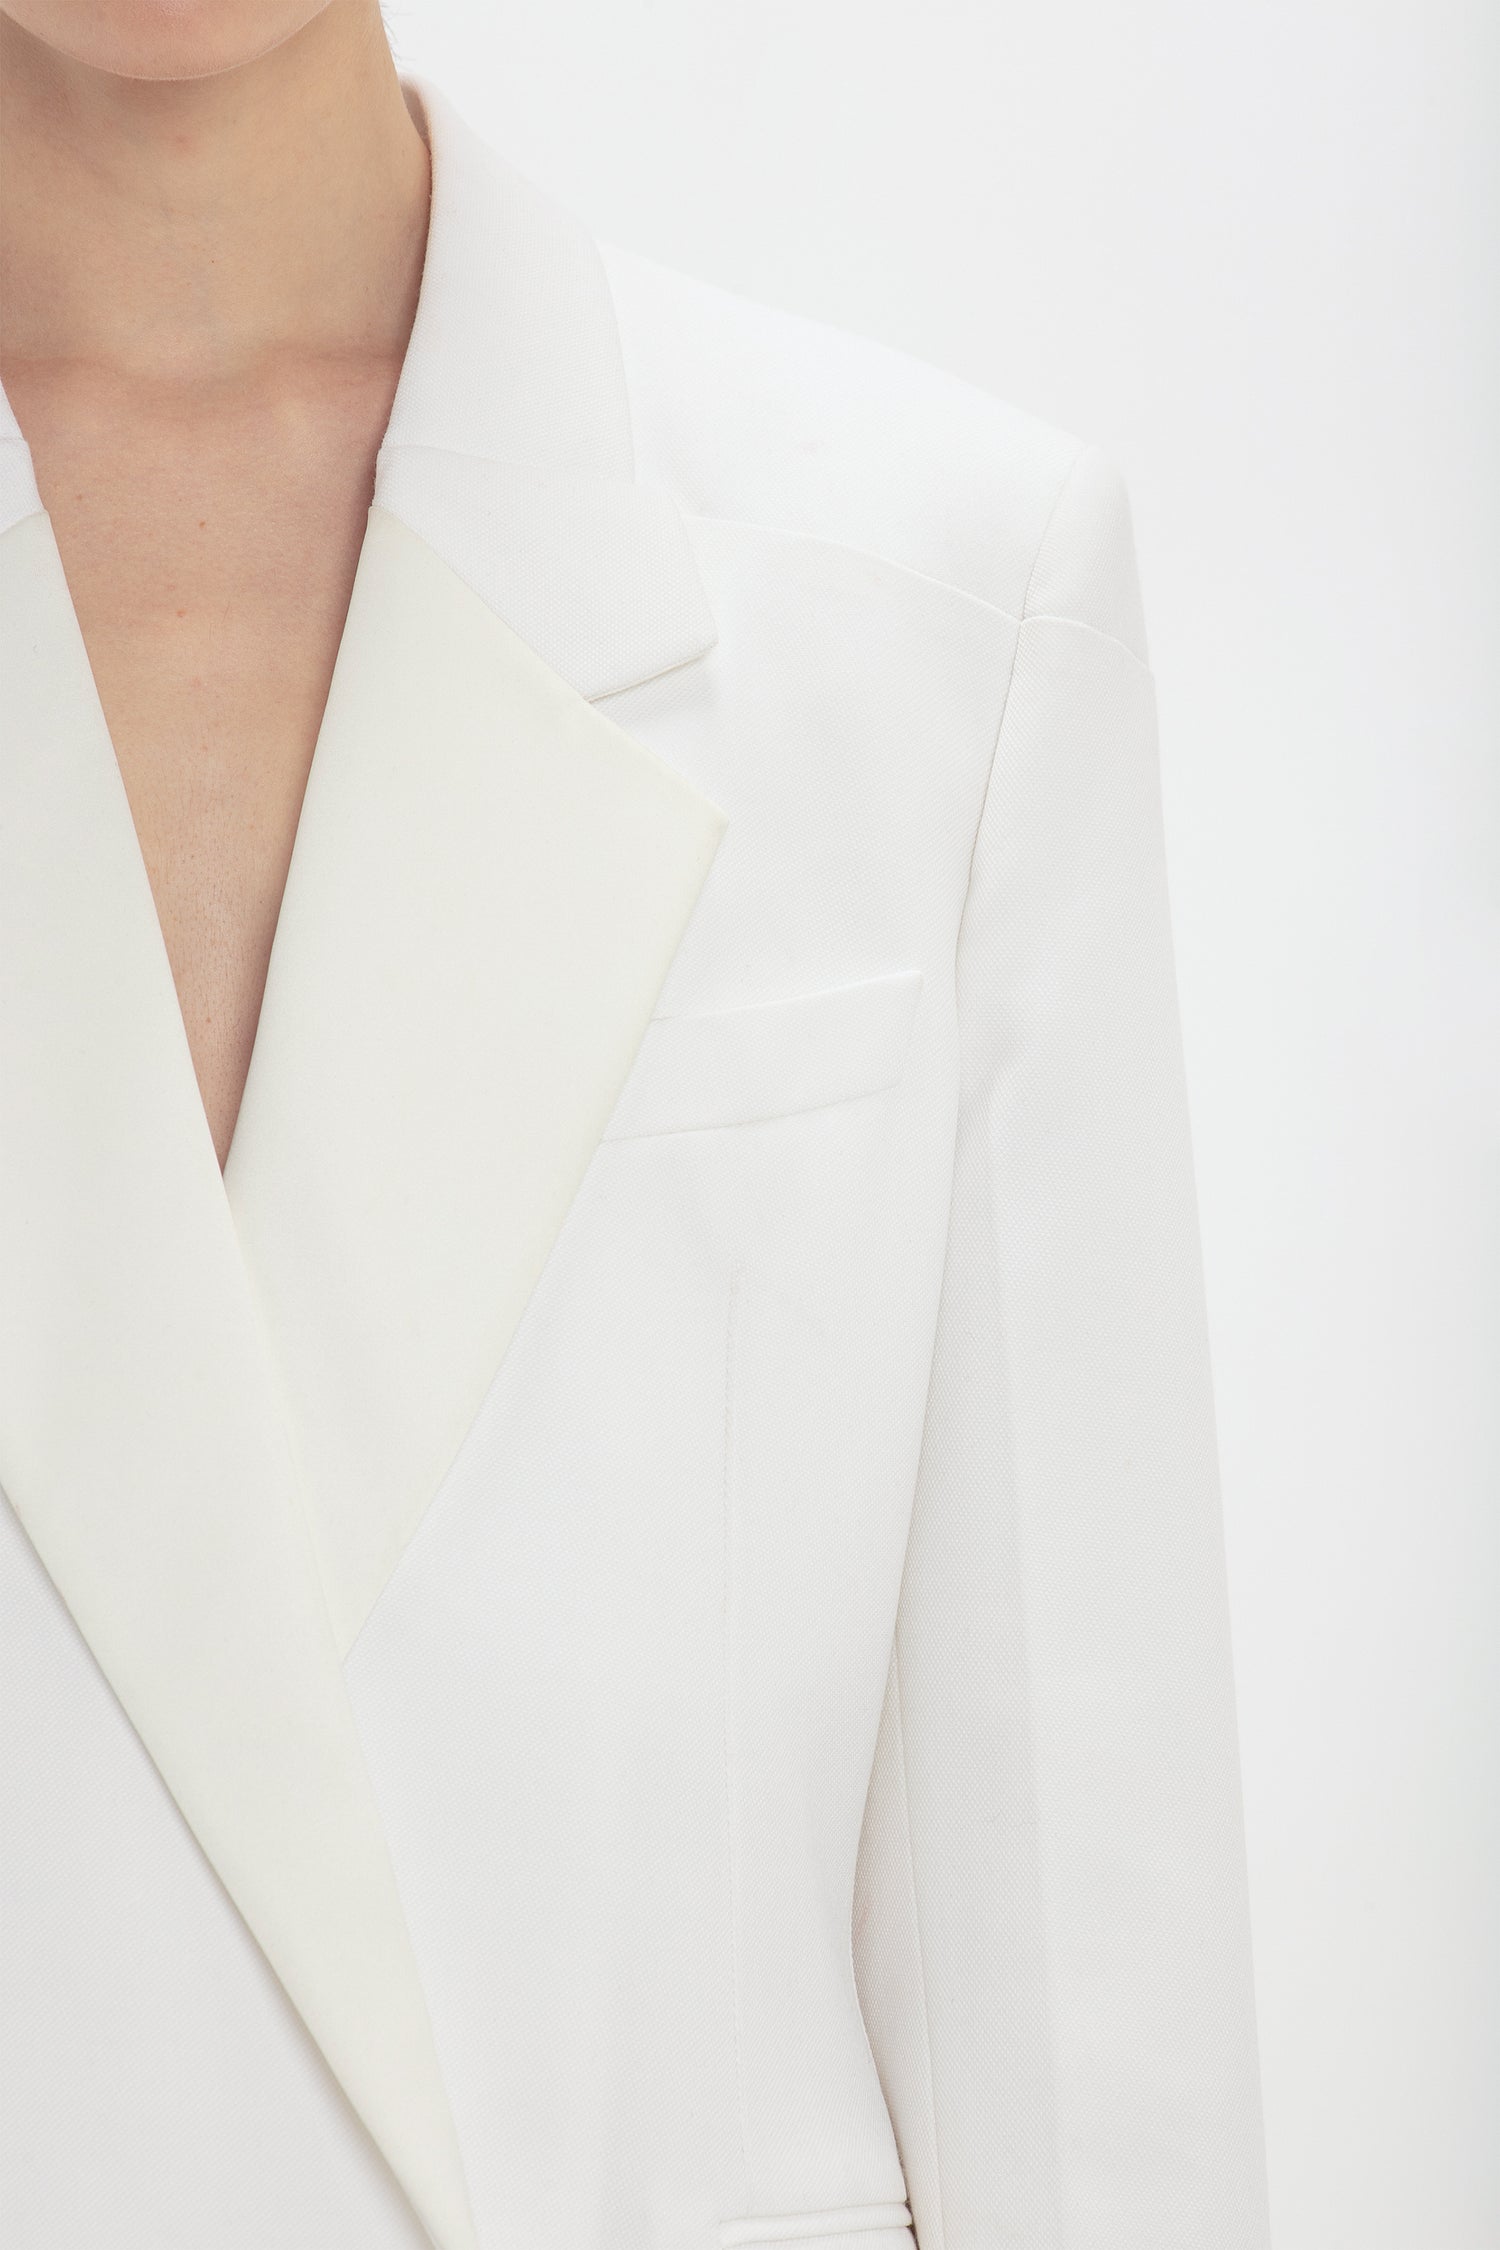 A close up of a person's Exclusive Fold Shoulder Detail Dress In Ivory by Victoria Beckham.